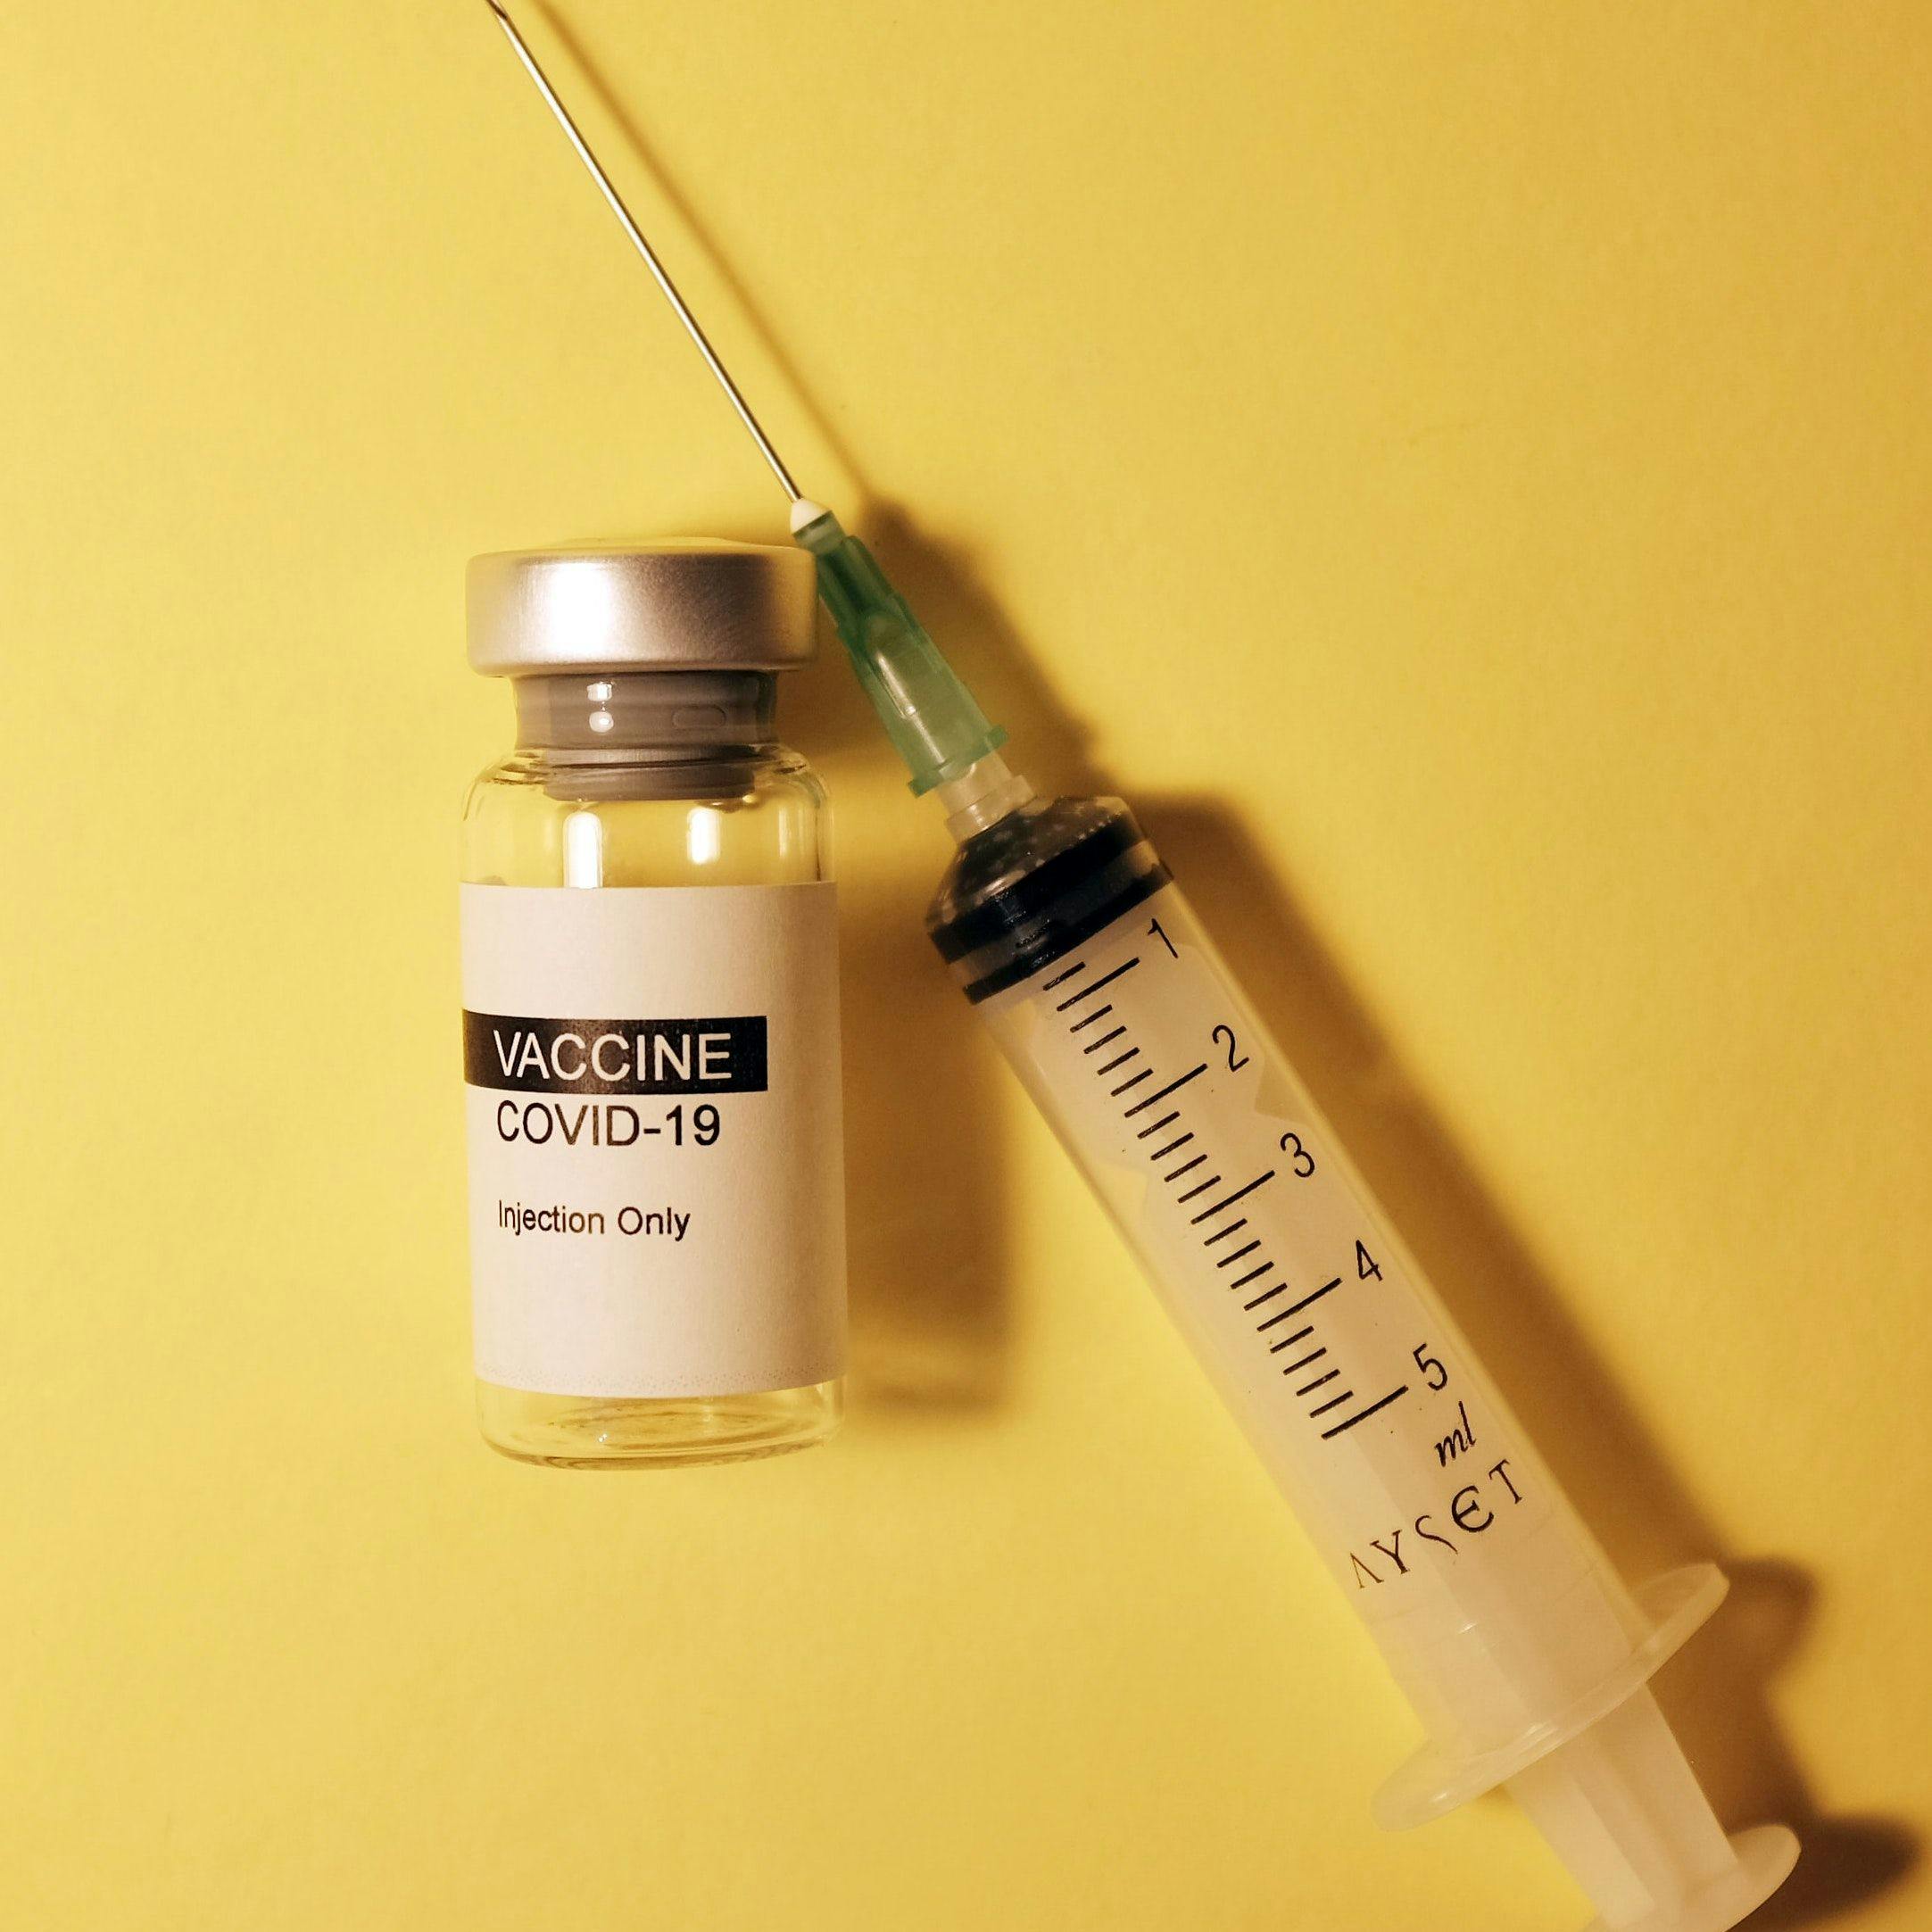 US Continues to Ramp Up COVID-19 Vaccination Program